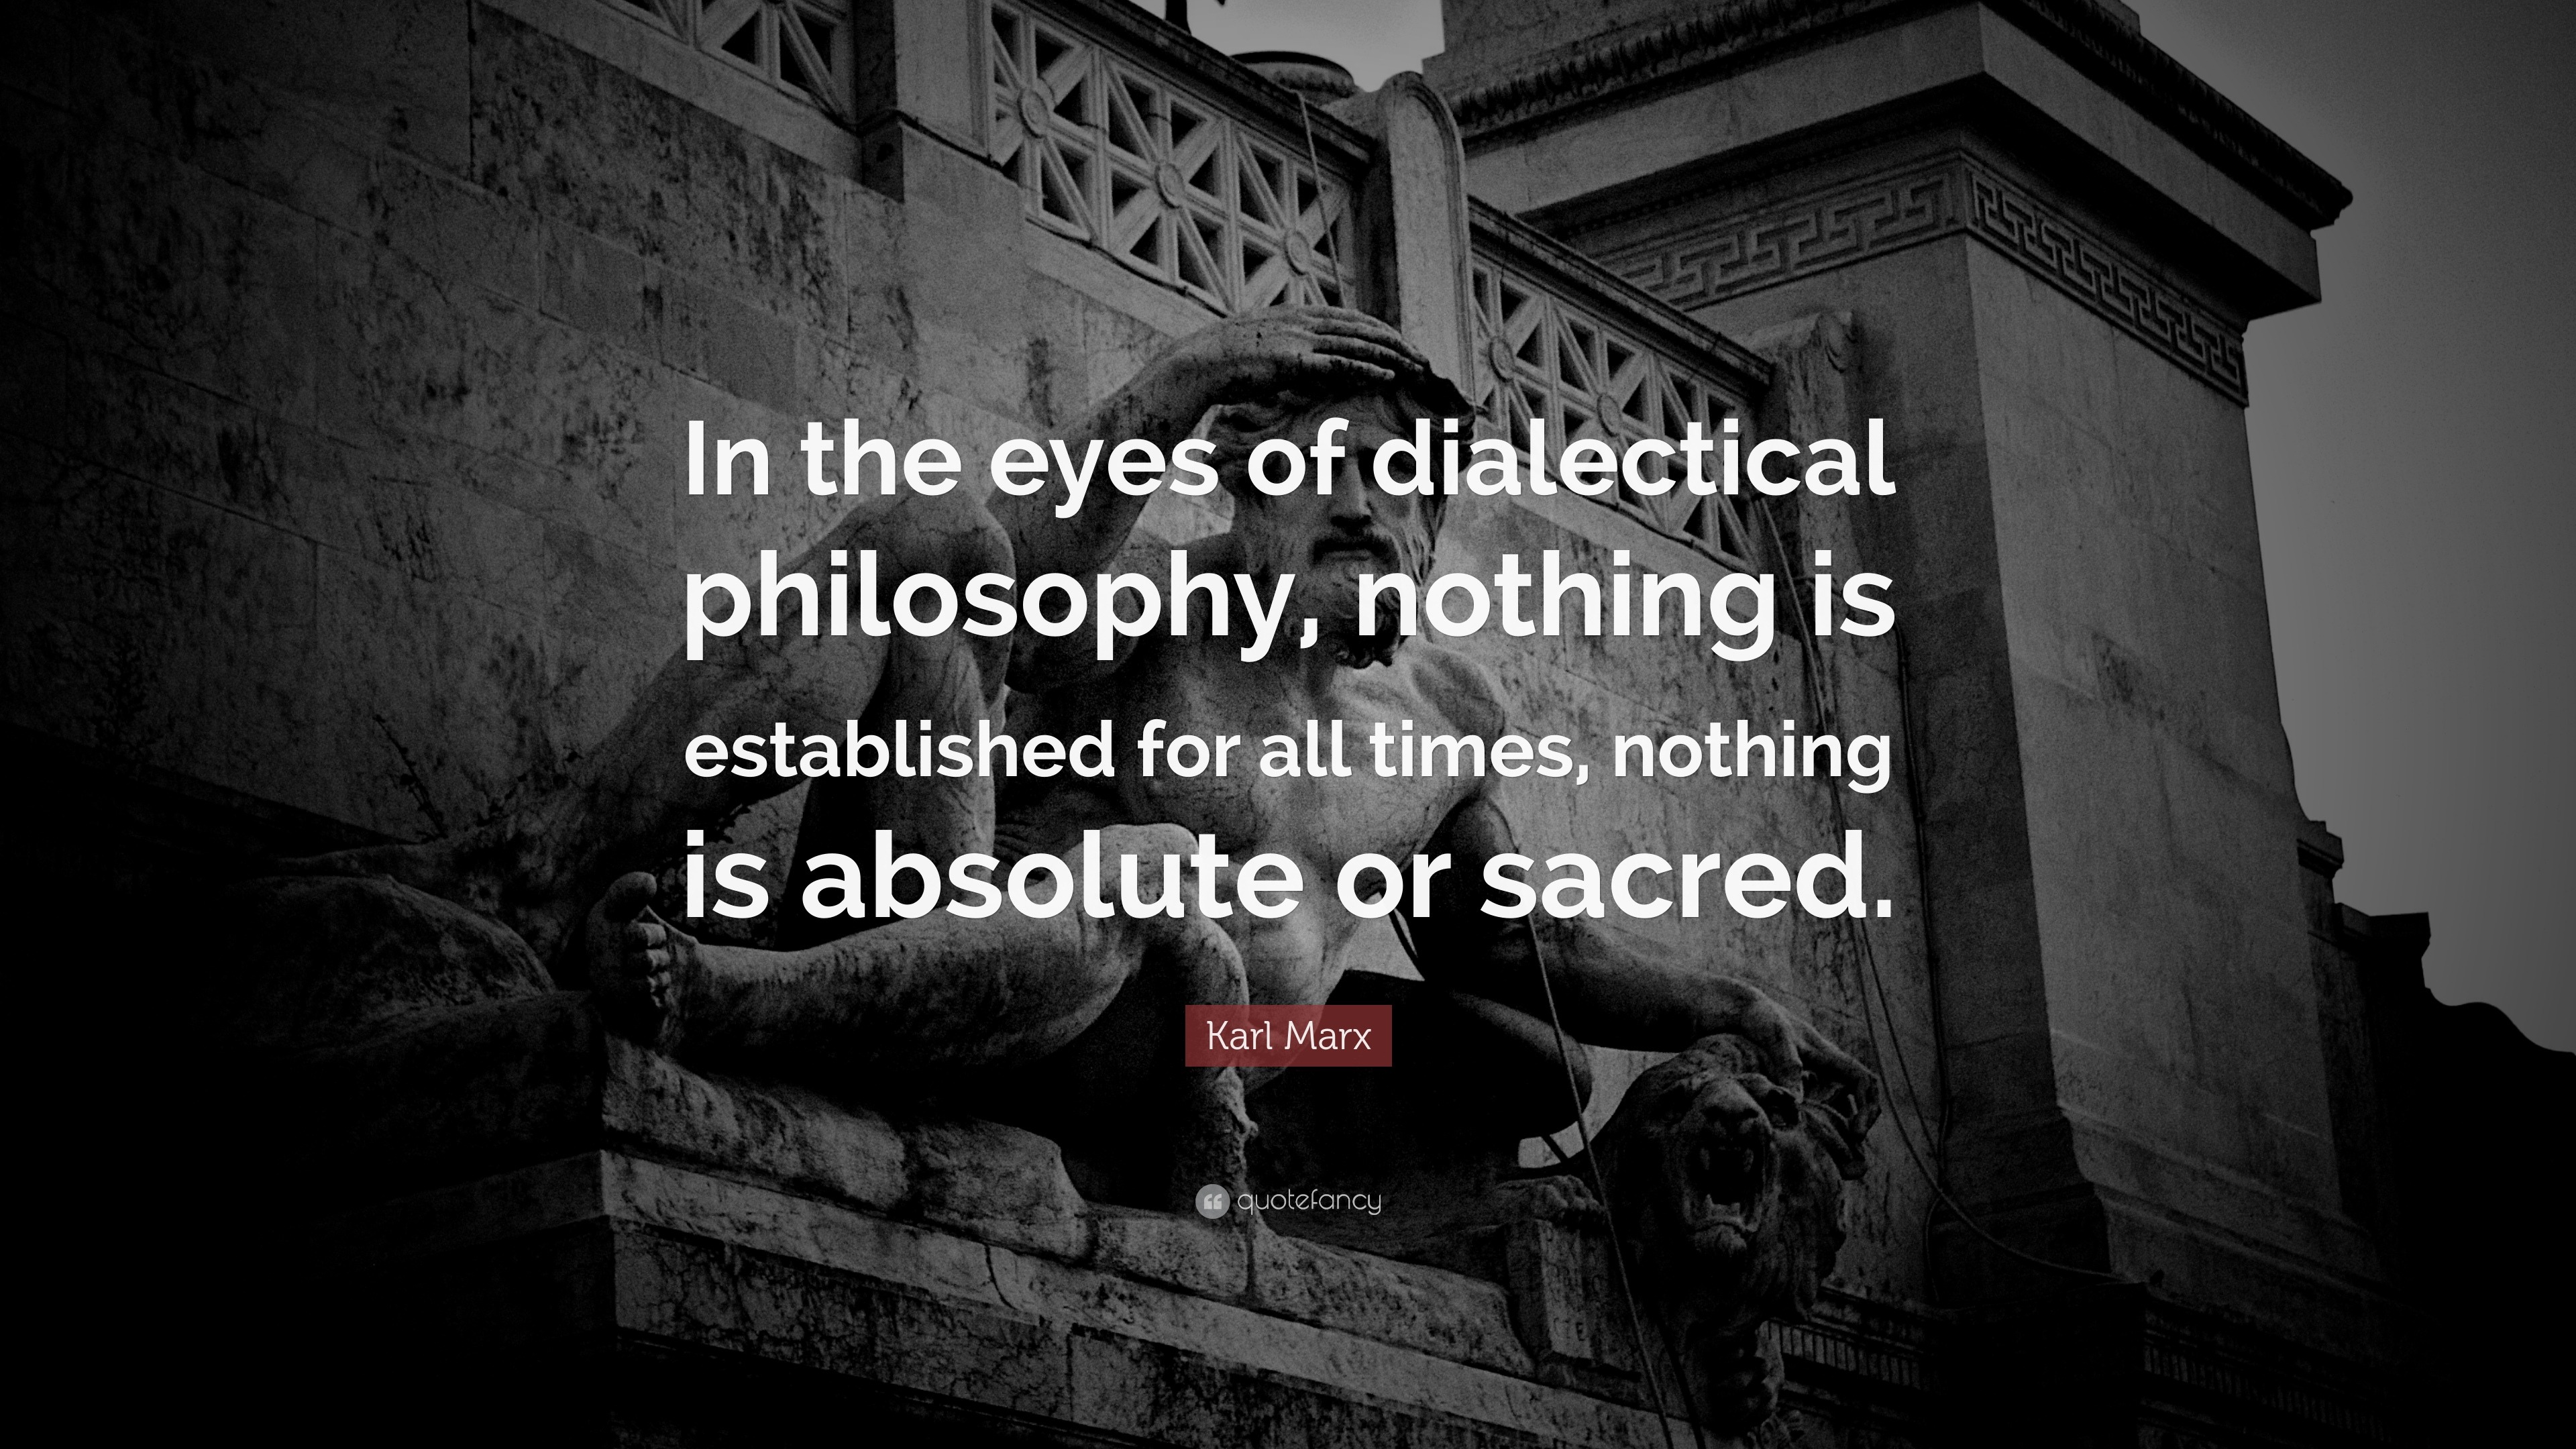 Karl Marx Quote In The Eyes Of Dialectical Philosophy Nothing Is Established For All Times Nothing Is Absolute Or Sacred 12 Wallpapers Quotefancy